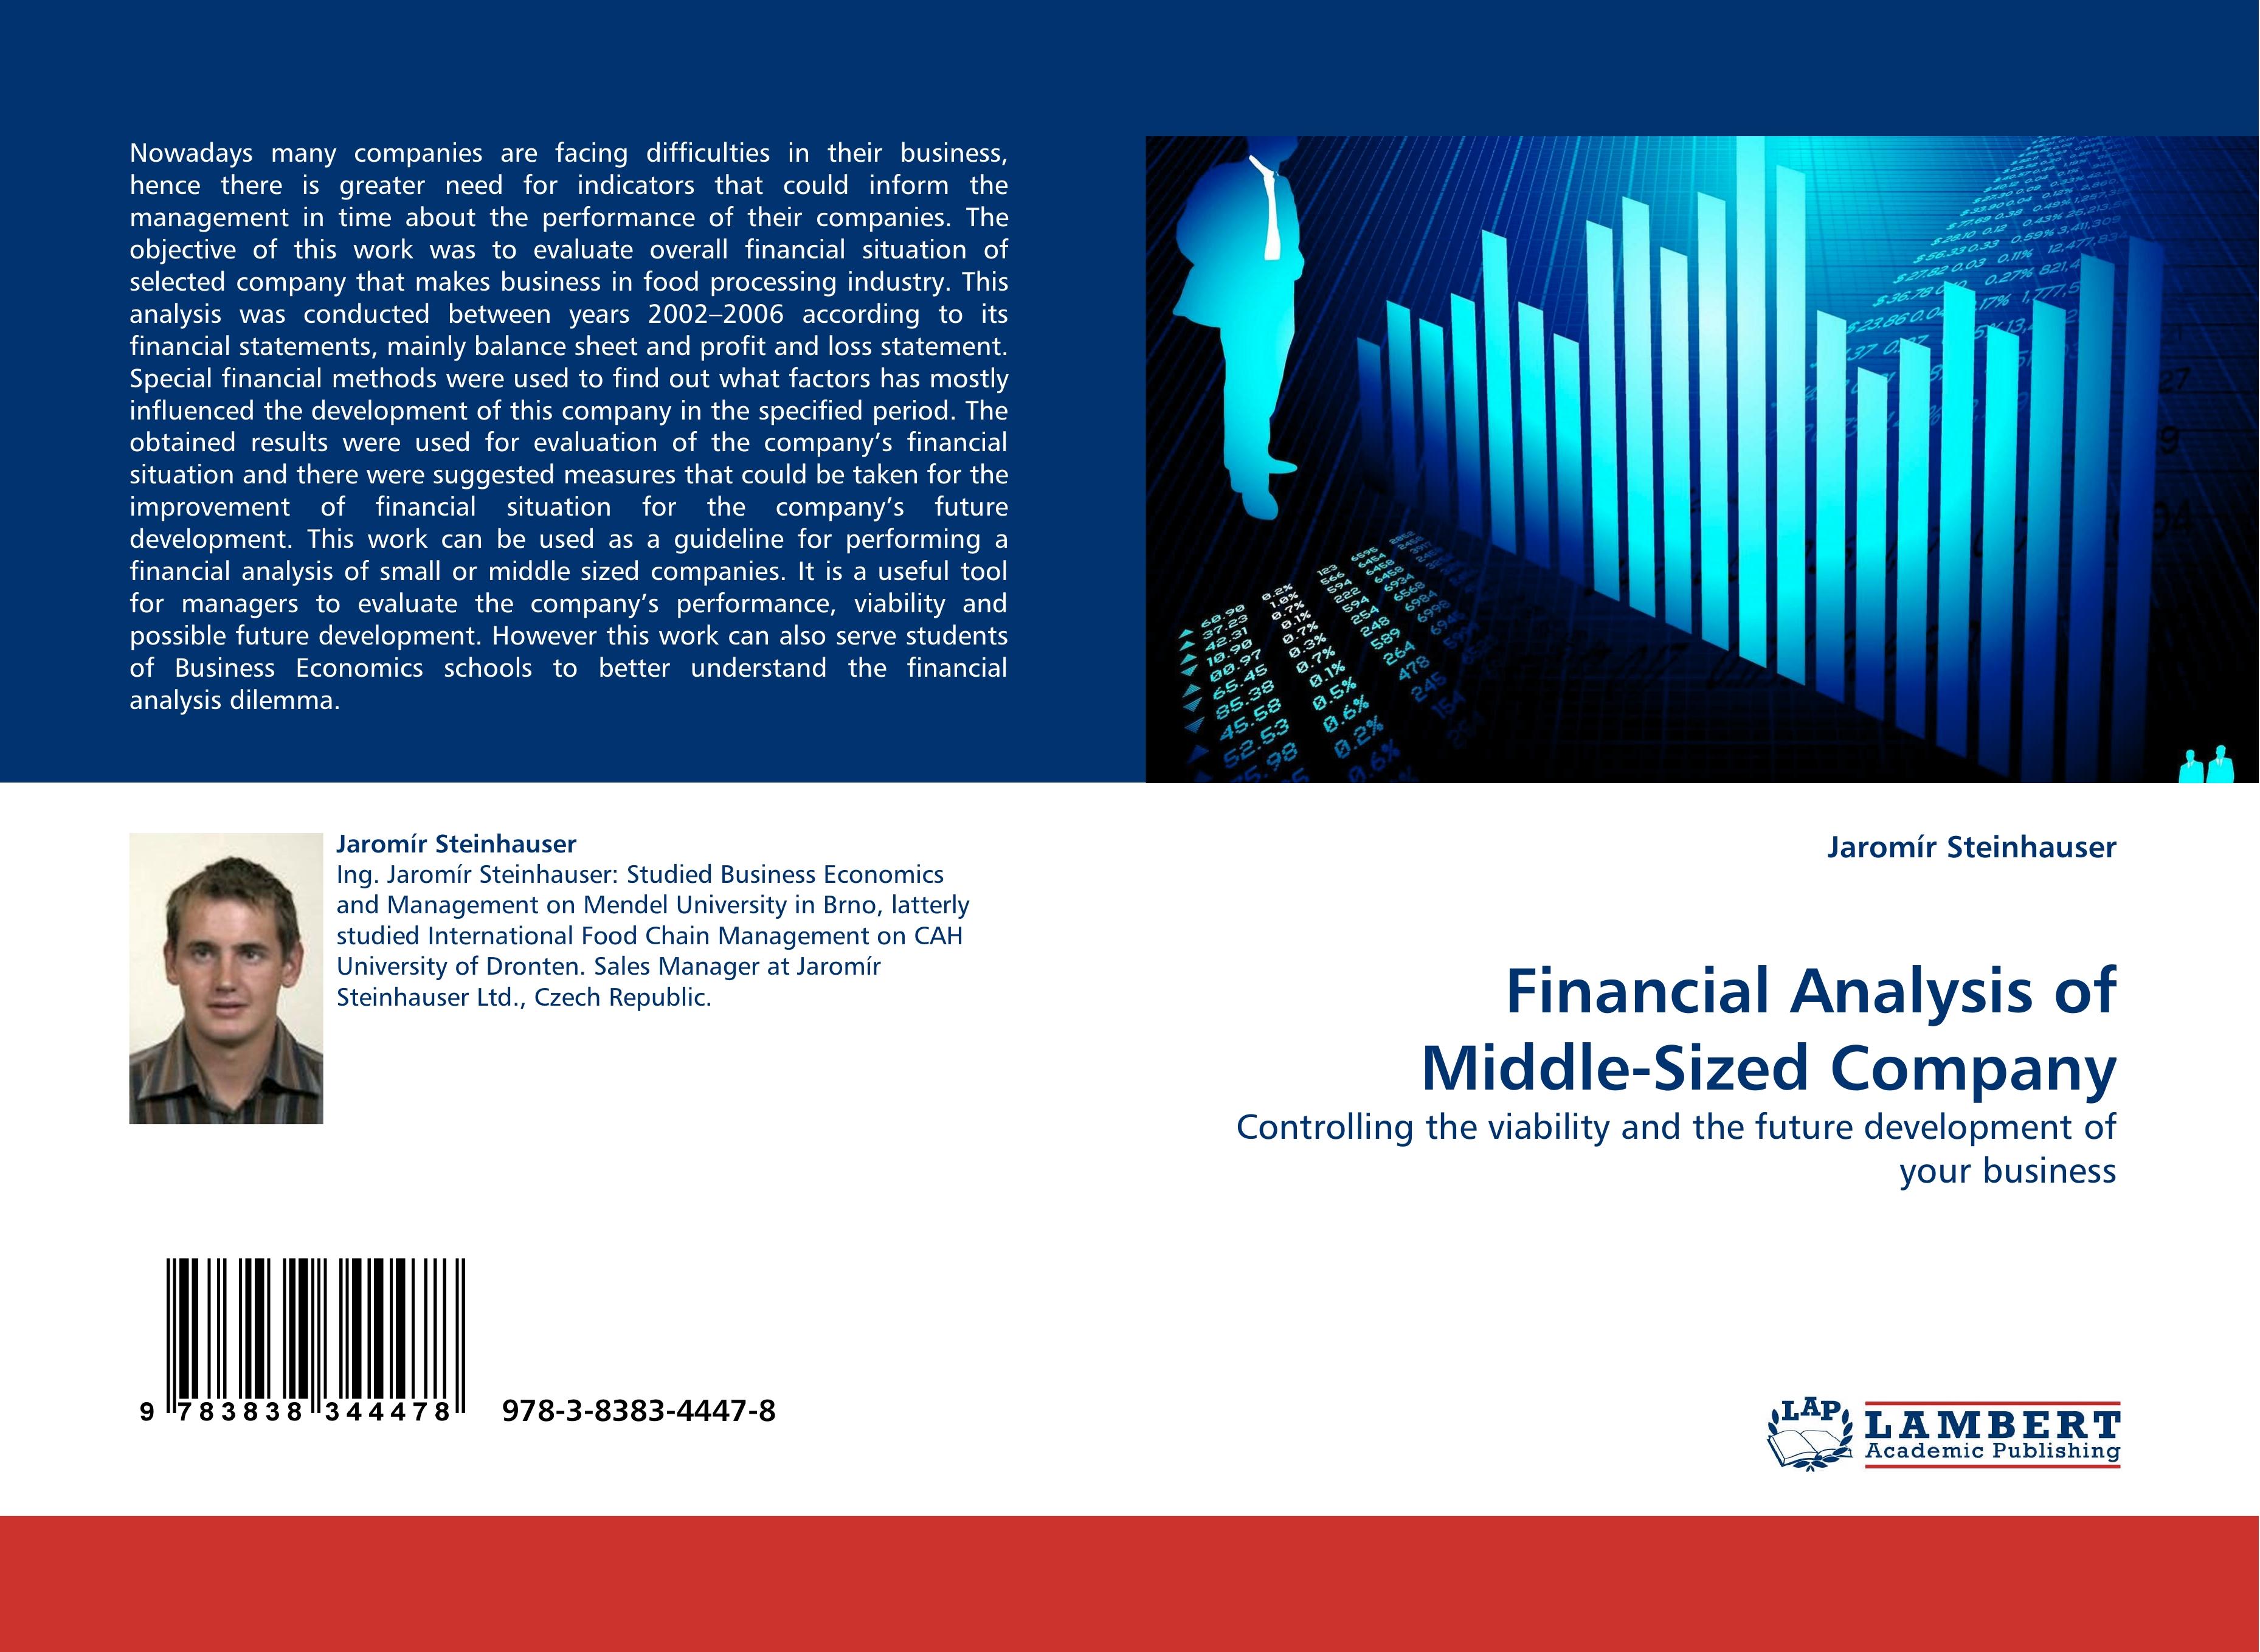 Financial Analysis of Middle-Sized Company / Controlling the viability and the future development of your business / Jaromír Steinhauser / Taschenbuch / Paperback / 76 S. / Englisch / 2010 - Steinhauser, Jaromír